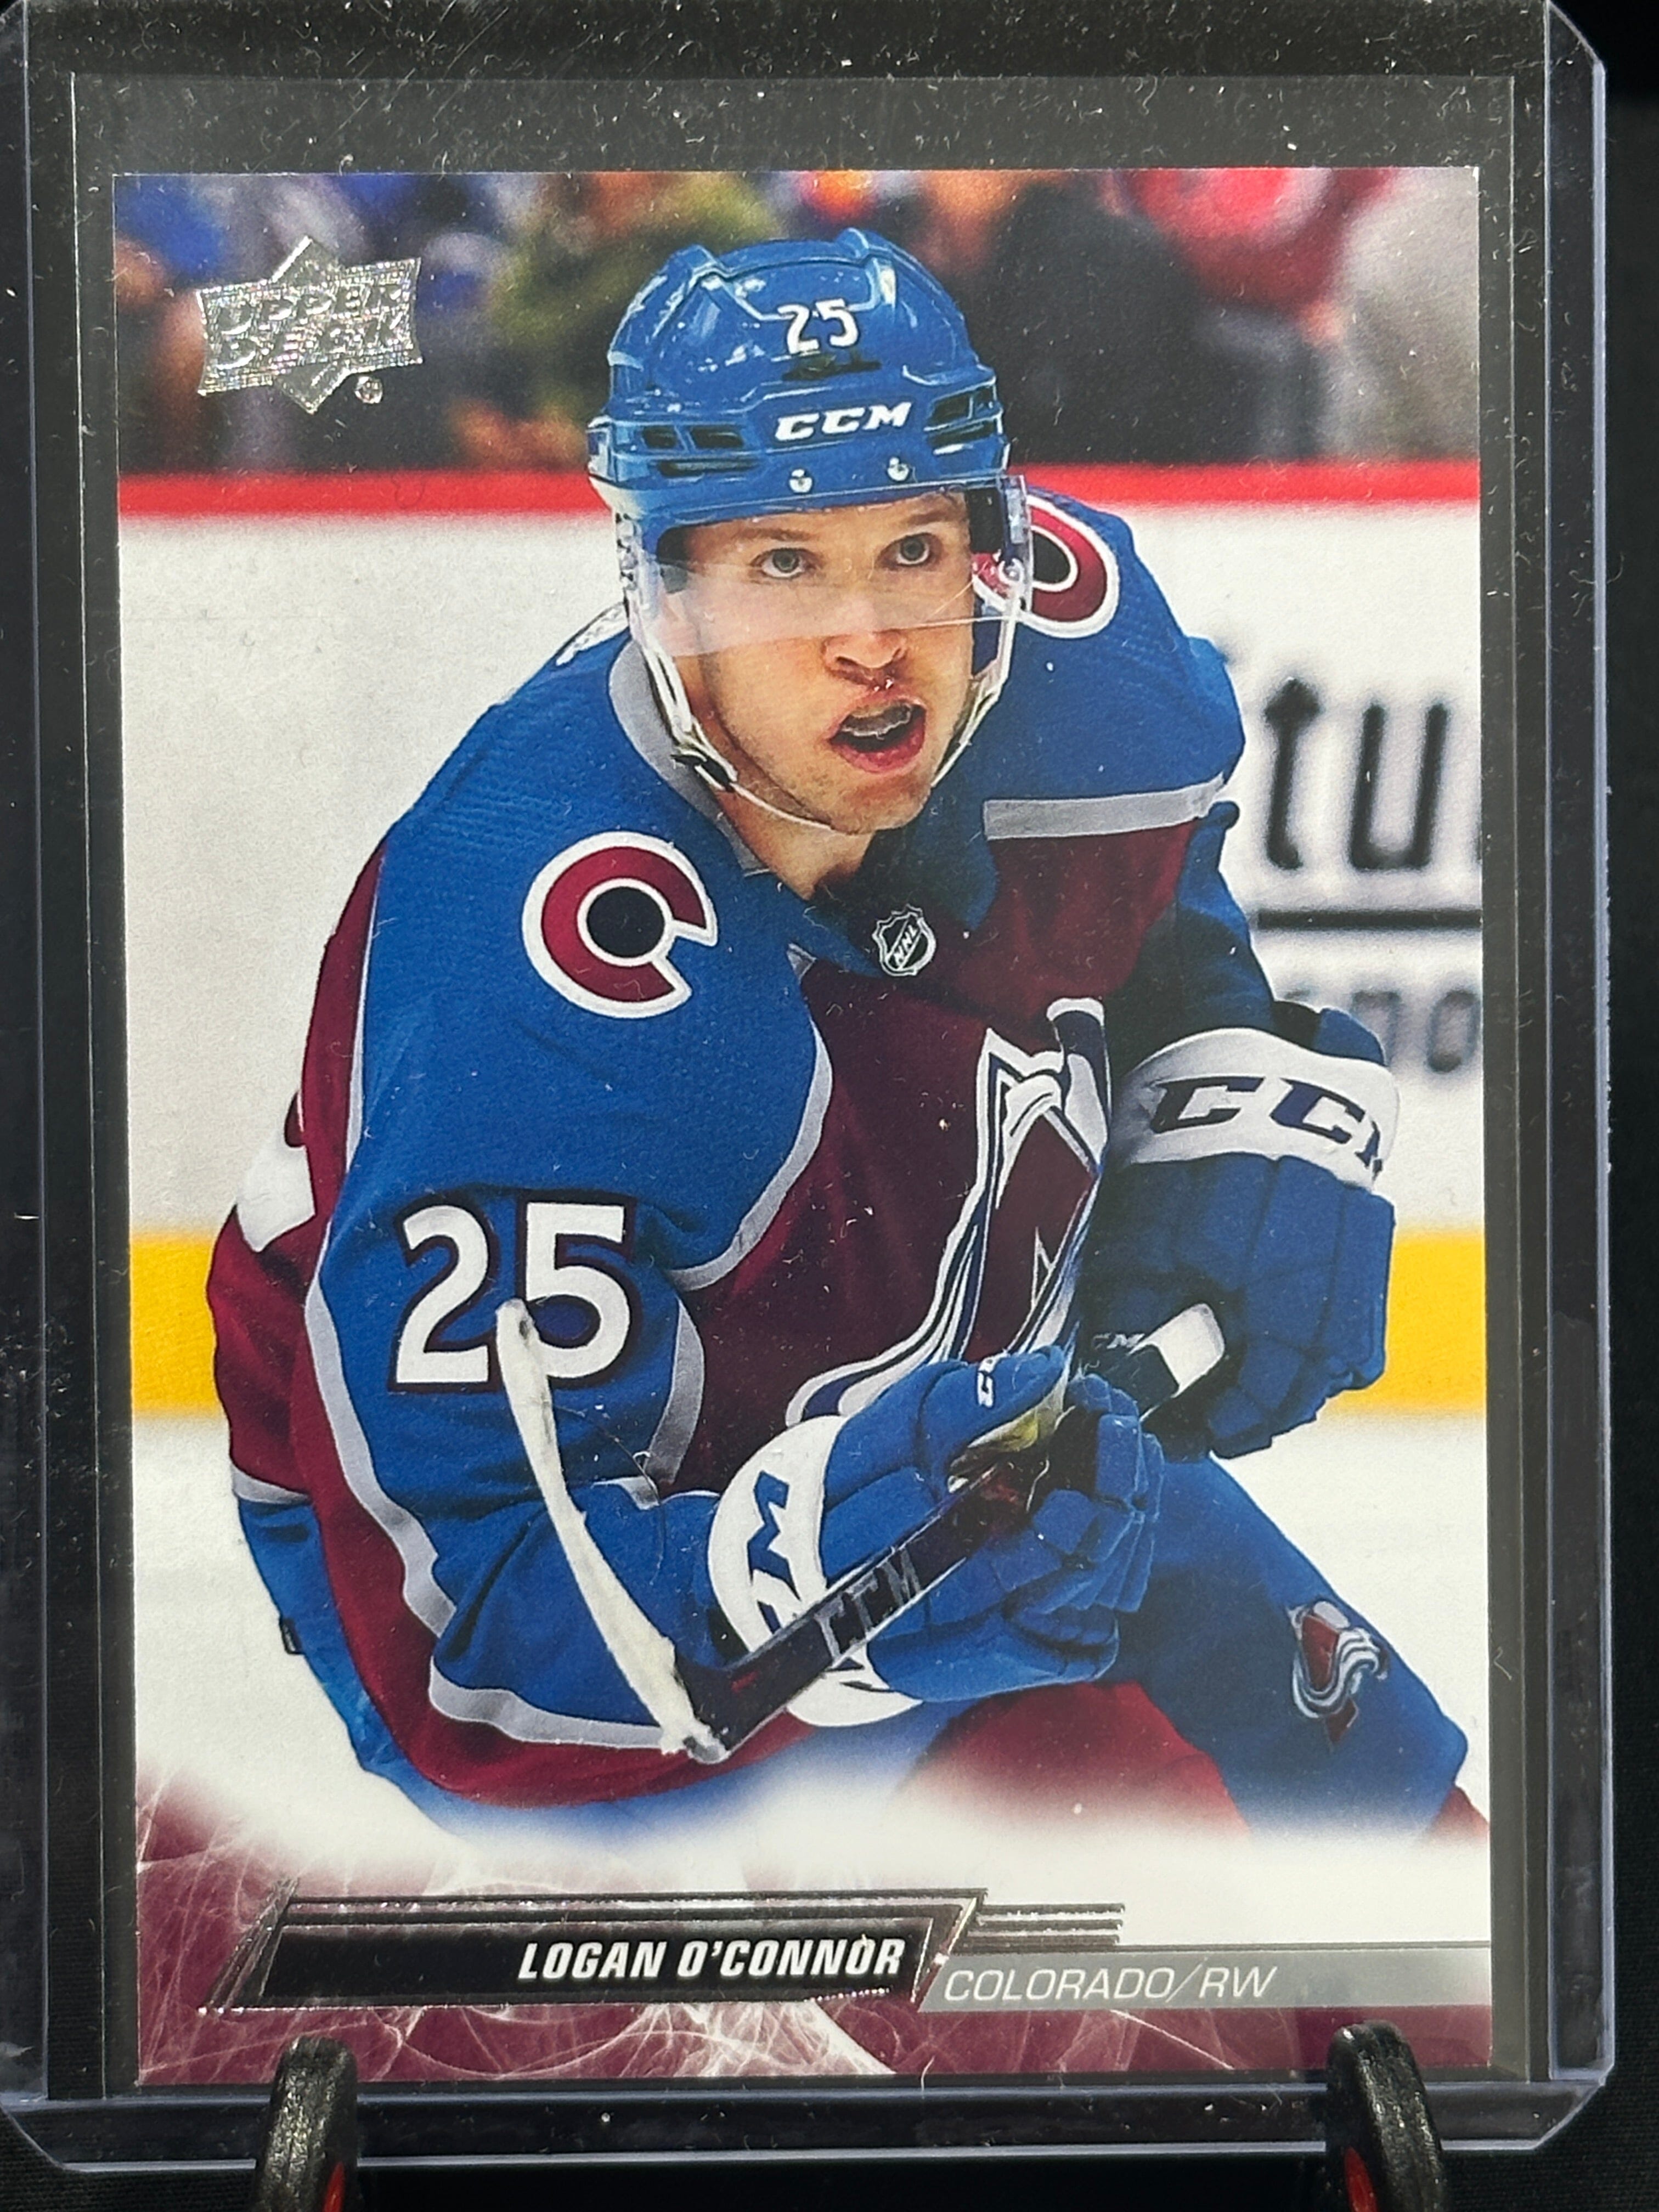 2022-23 UD Extended Series Base #538 Logan O'Connor - Colorado Avalanche Shootnscore.com 